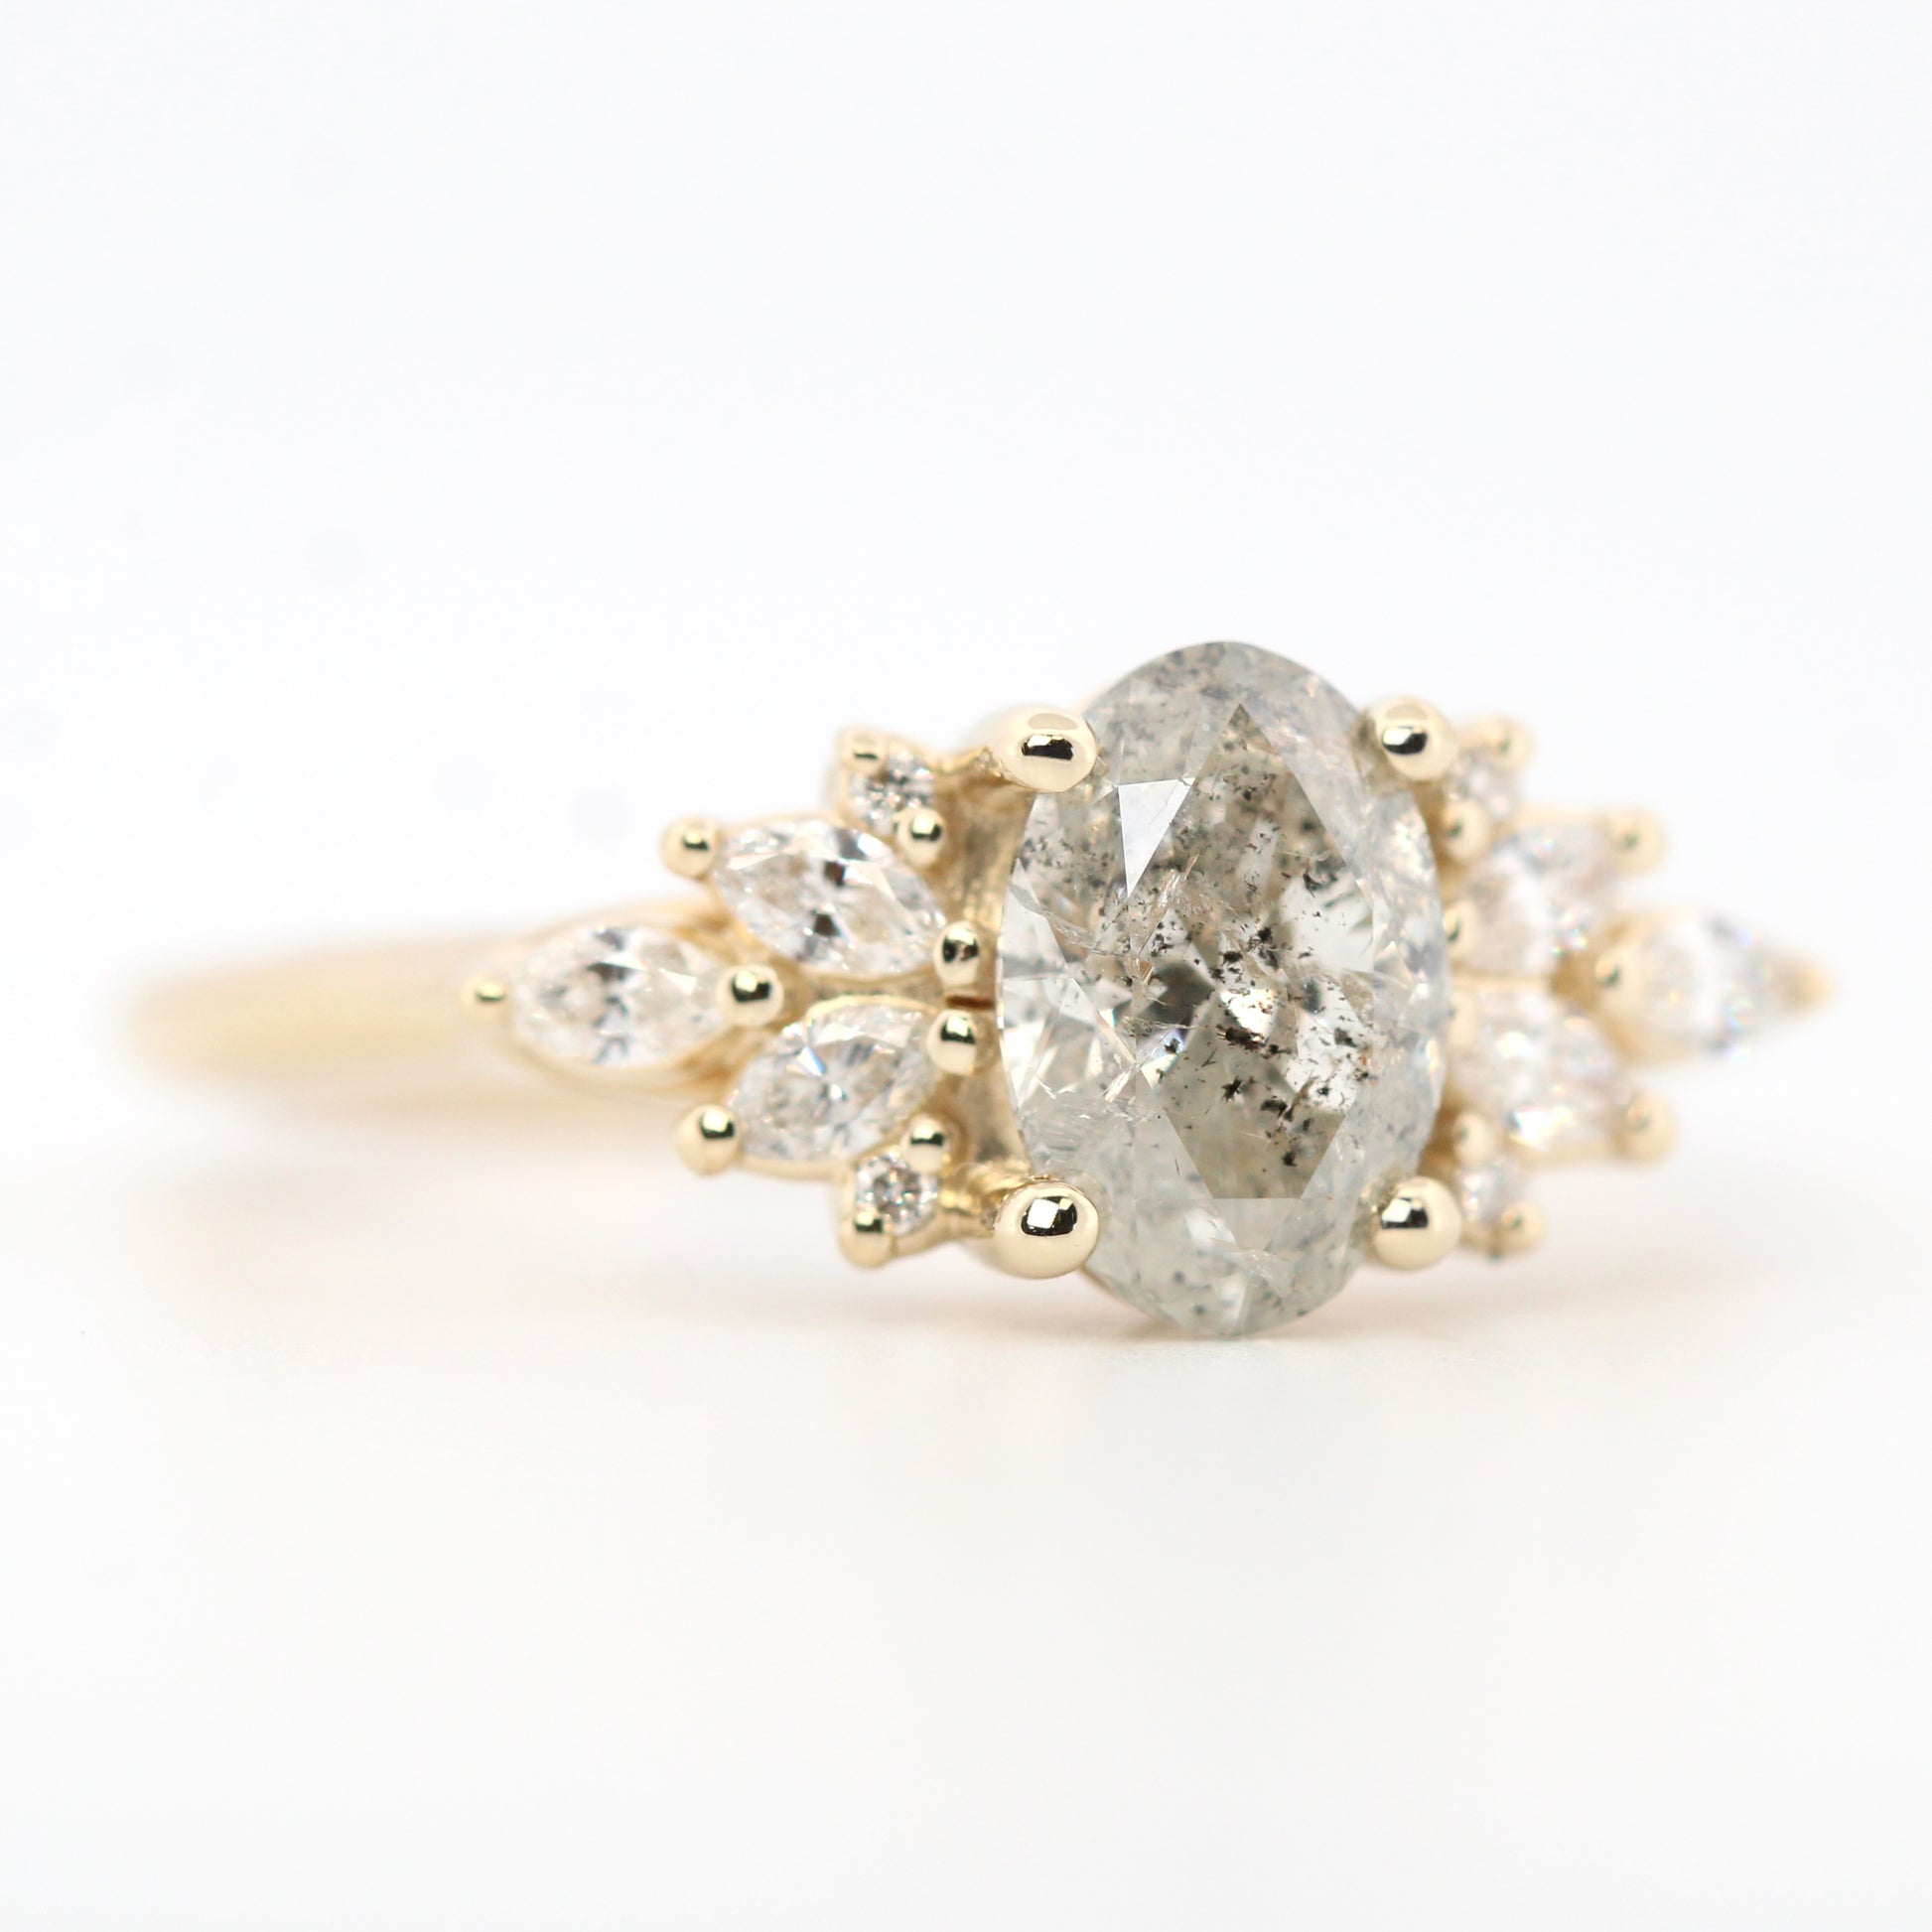 Odette Ring with a 1.05 Carat Oval Gray Celestial Diamond and White Accent Diamonds in 14k Yellow Gold - Ready to Size and Ship - Midwinter Co. Alternative Bridal Rings and Modern Fine Jewelry